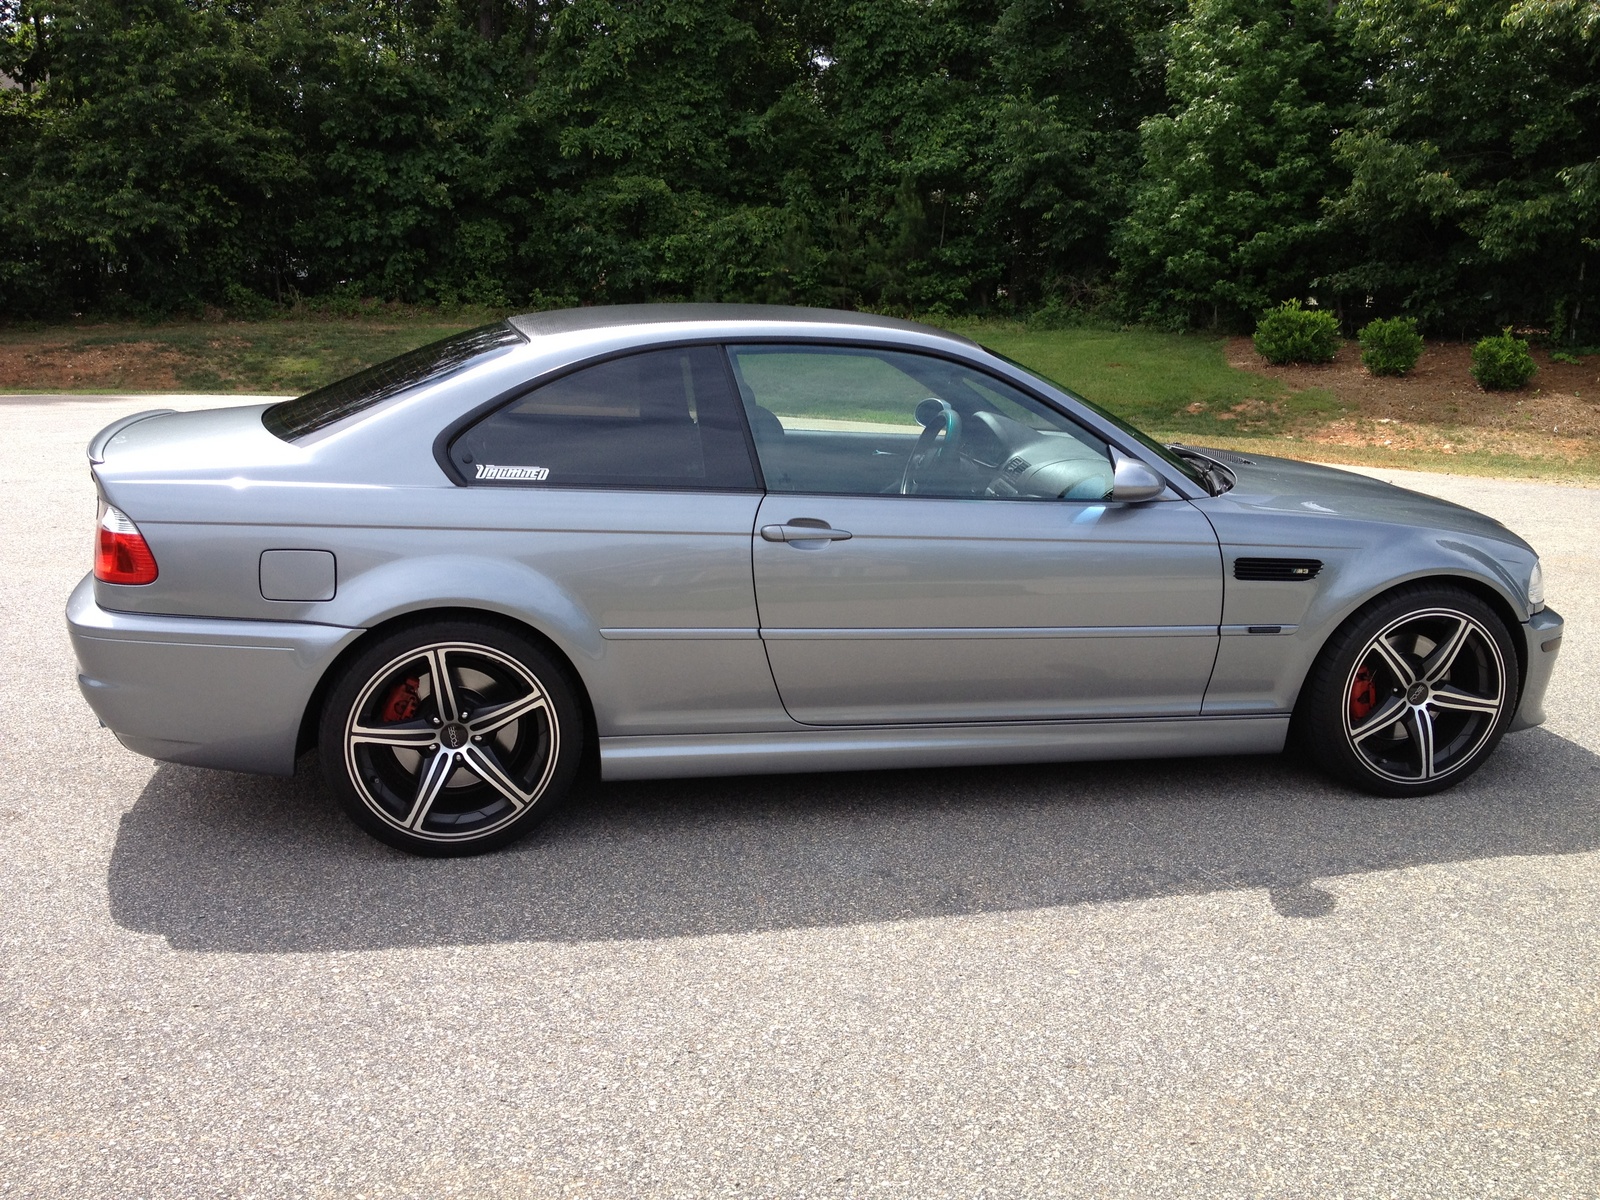 2004 Bmw m3 coupe review #2